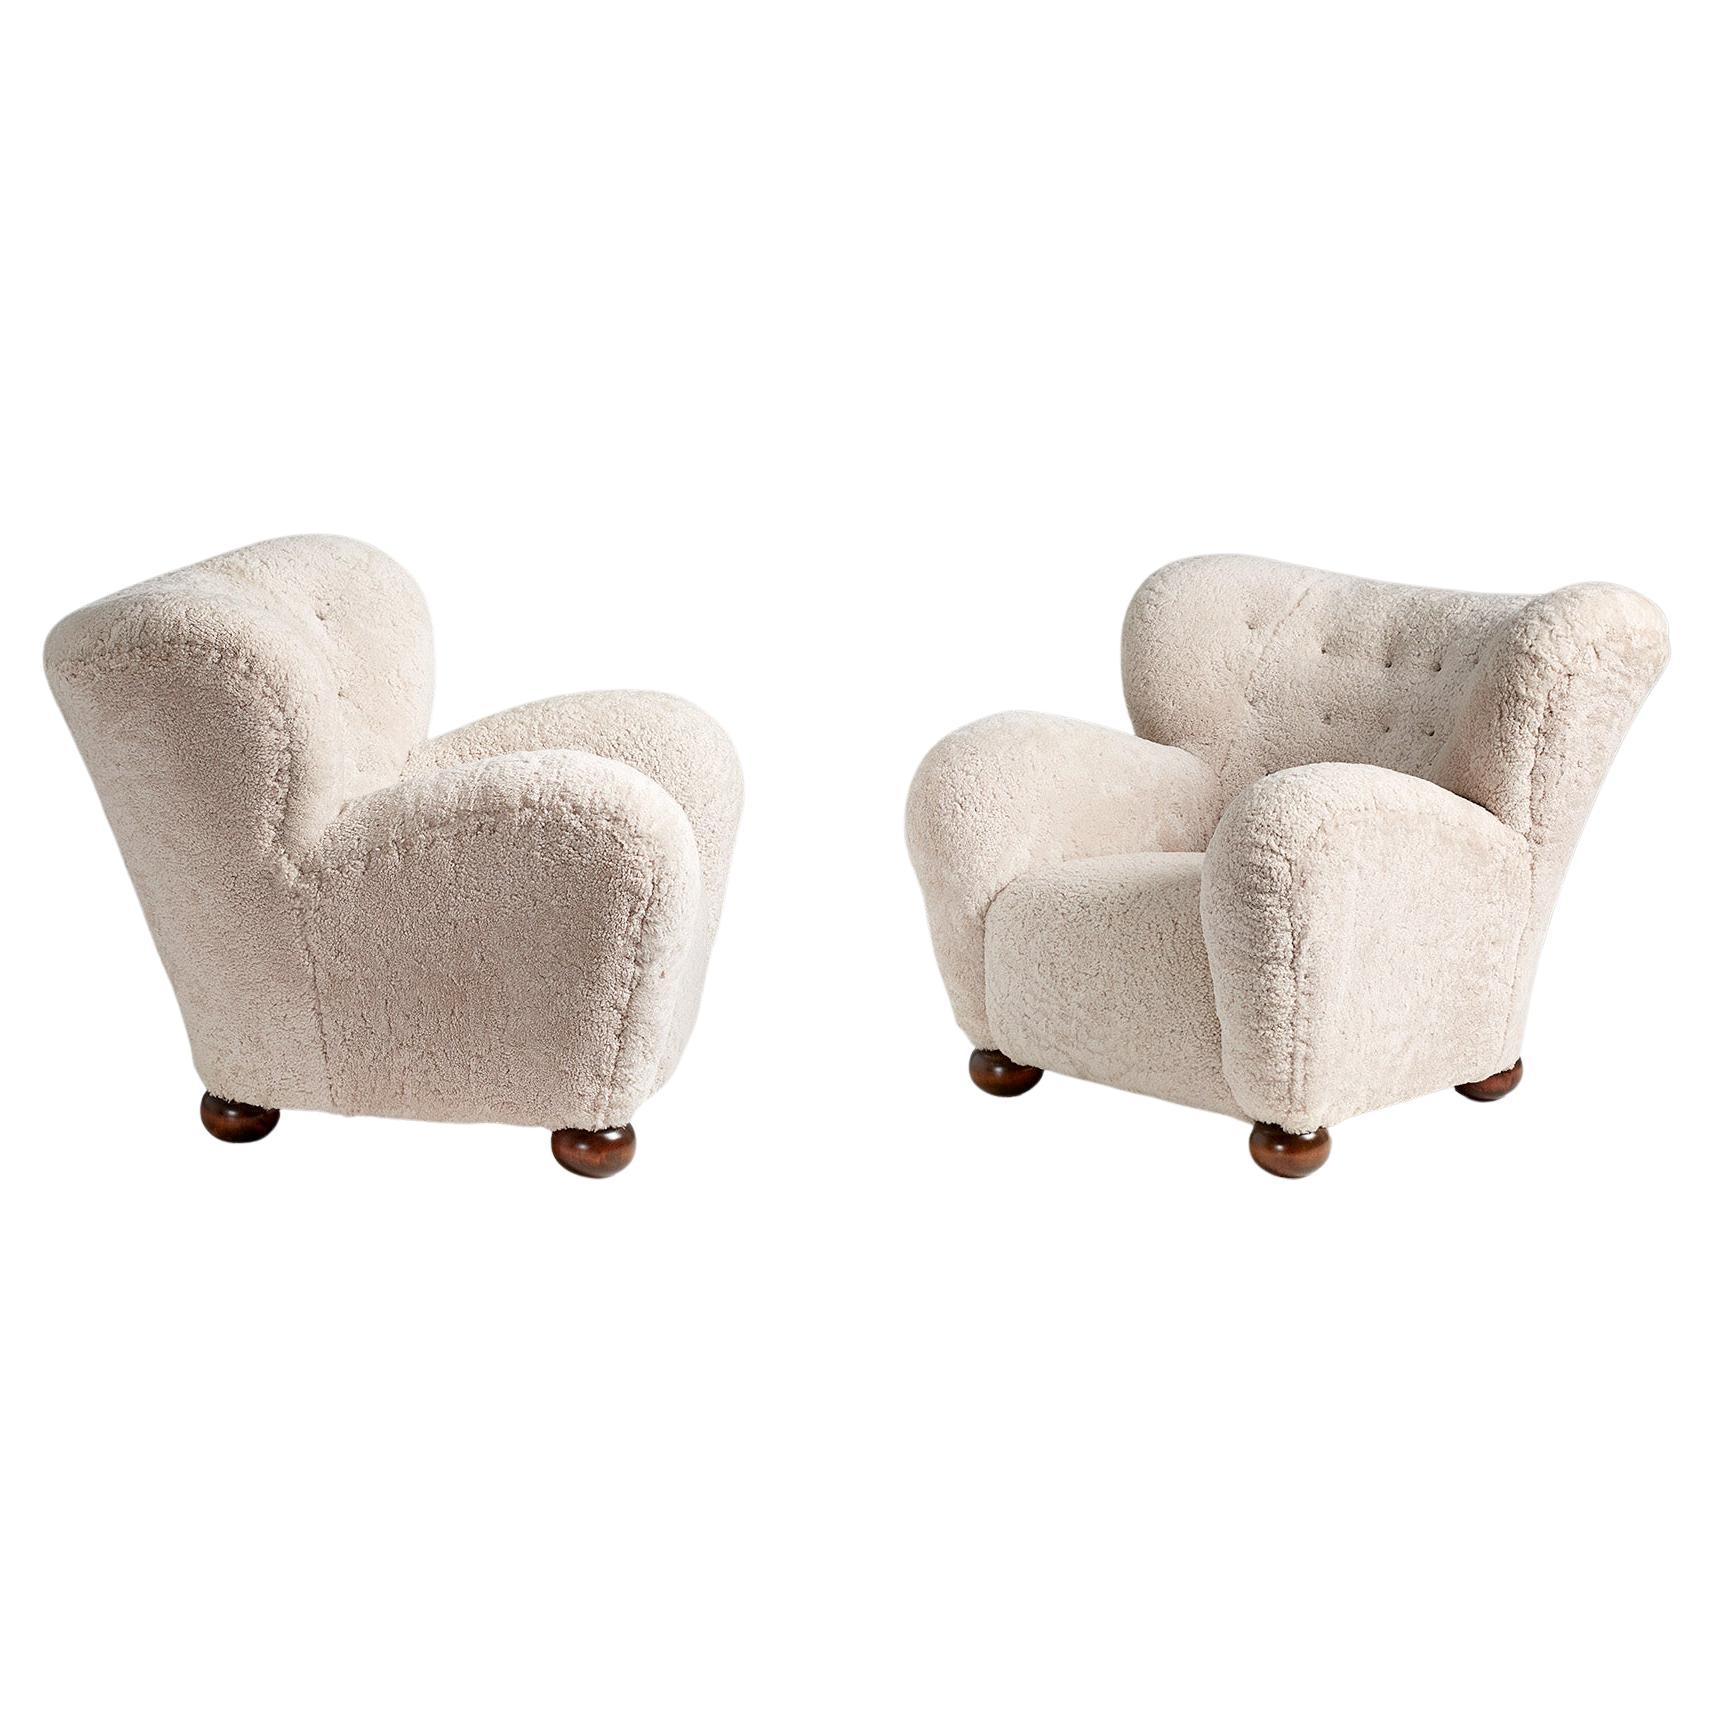 Pair of Marta Blomstedt 1930s Sheepskin Wing Chairs for the Hotel Aulanko For Sale